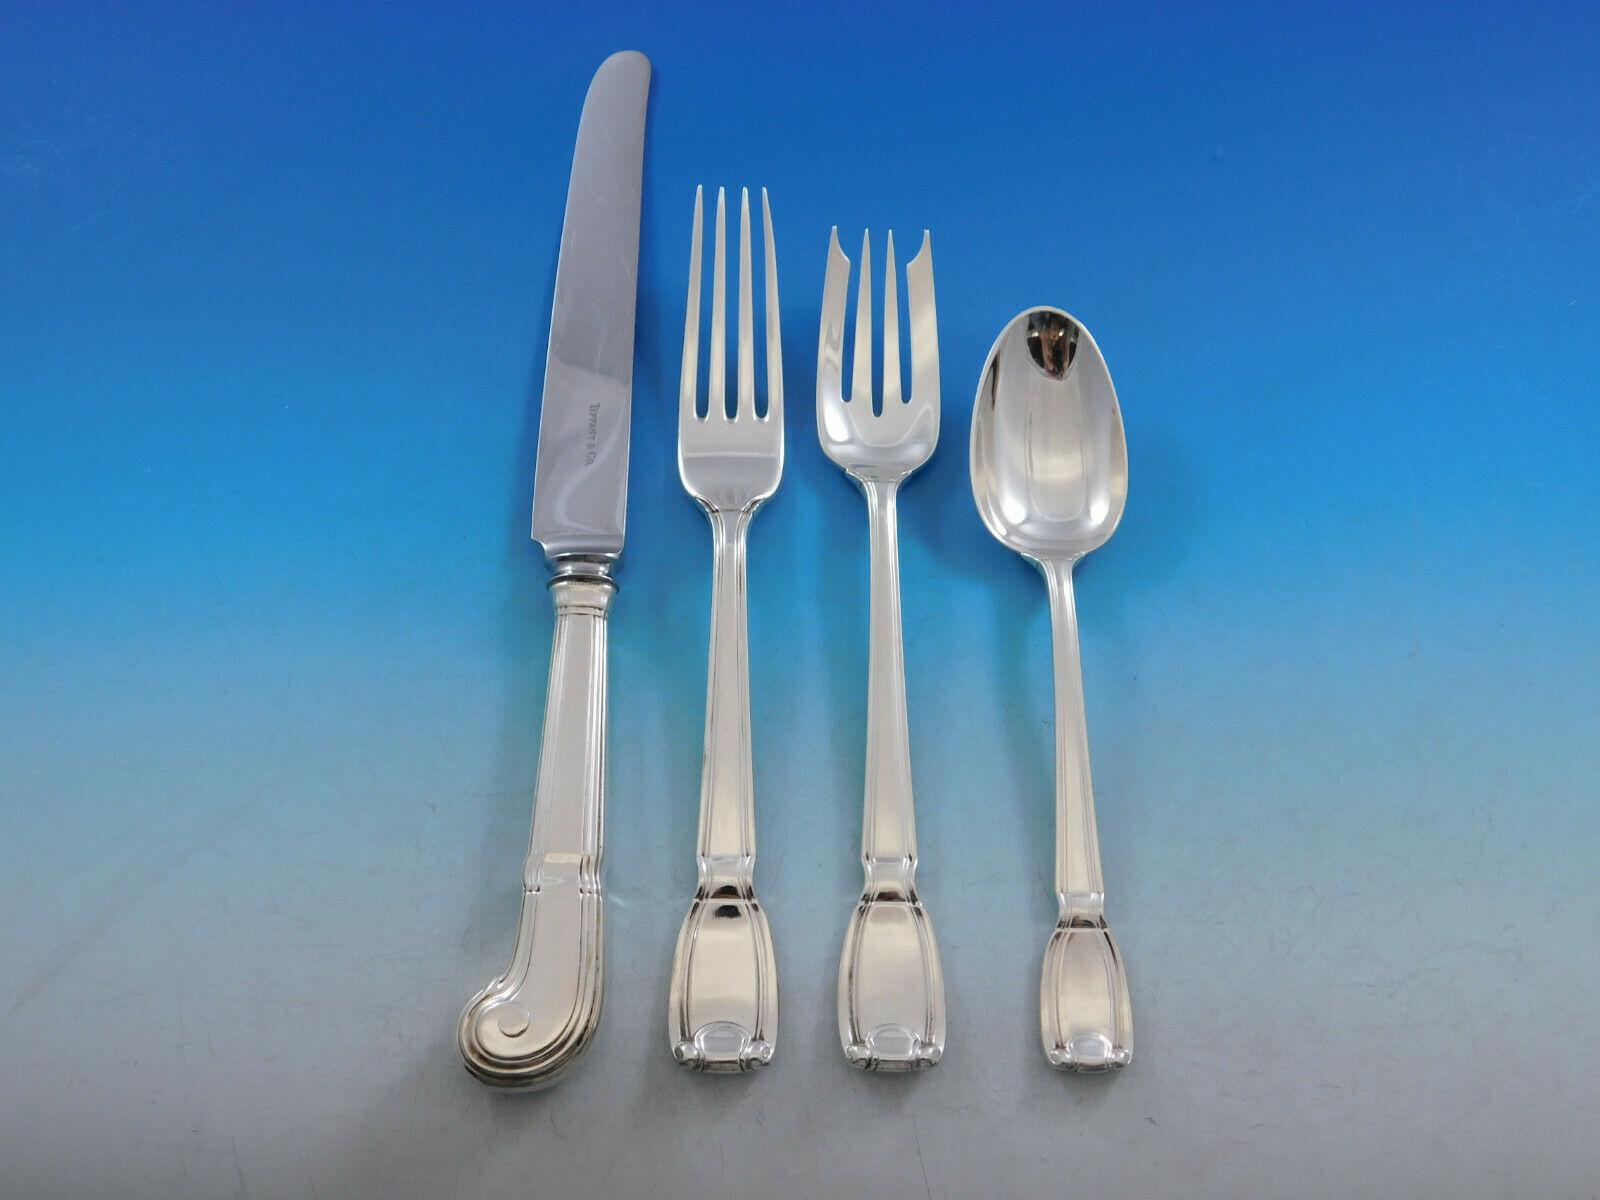 Castilian by Tiffany & Co. sterling silver flatware set, 48 pieces. This set includes:

6 knives, pistol-grip handles, 9 1/8